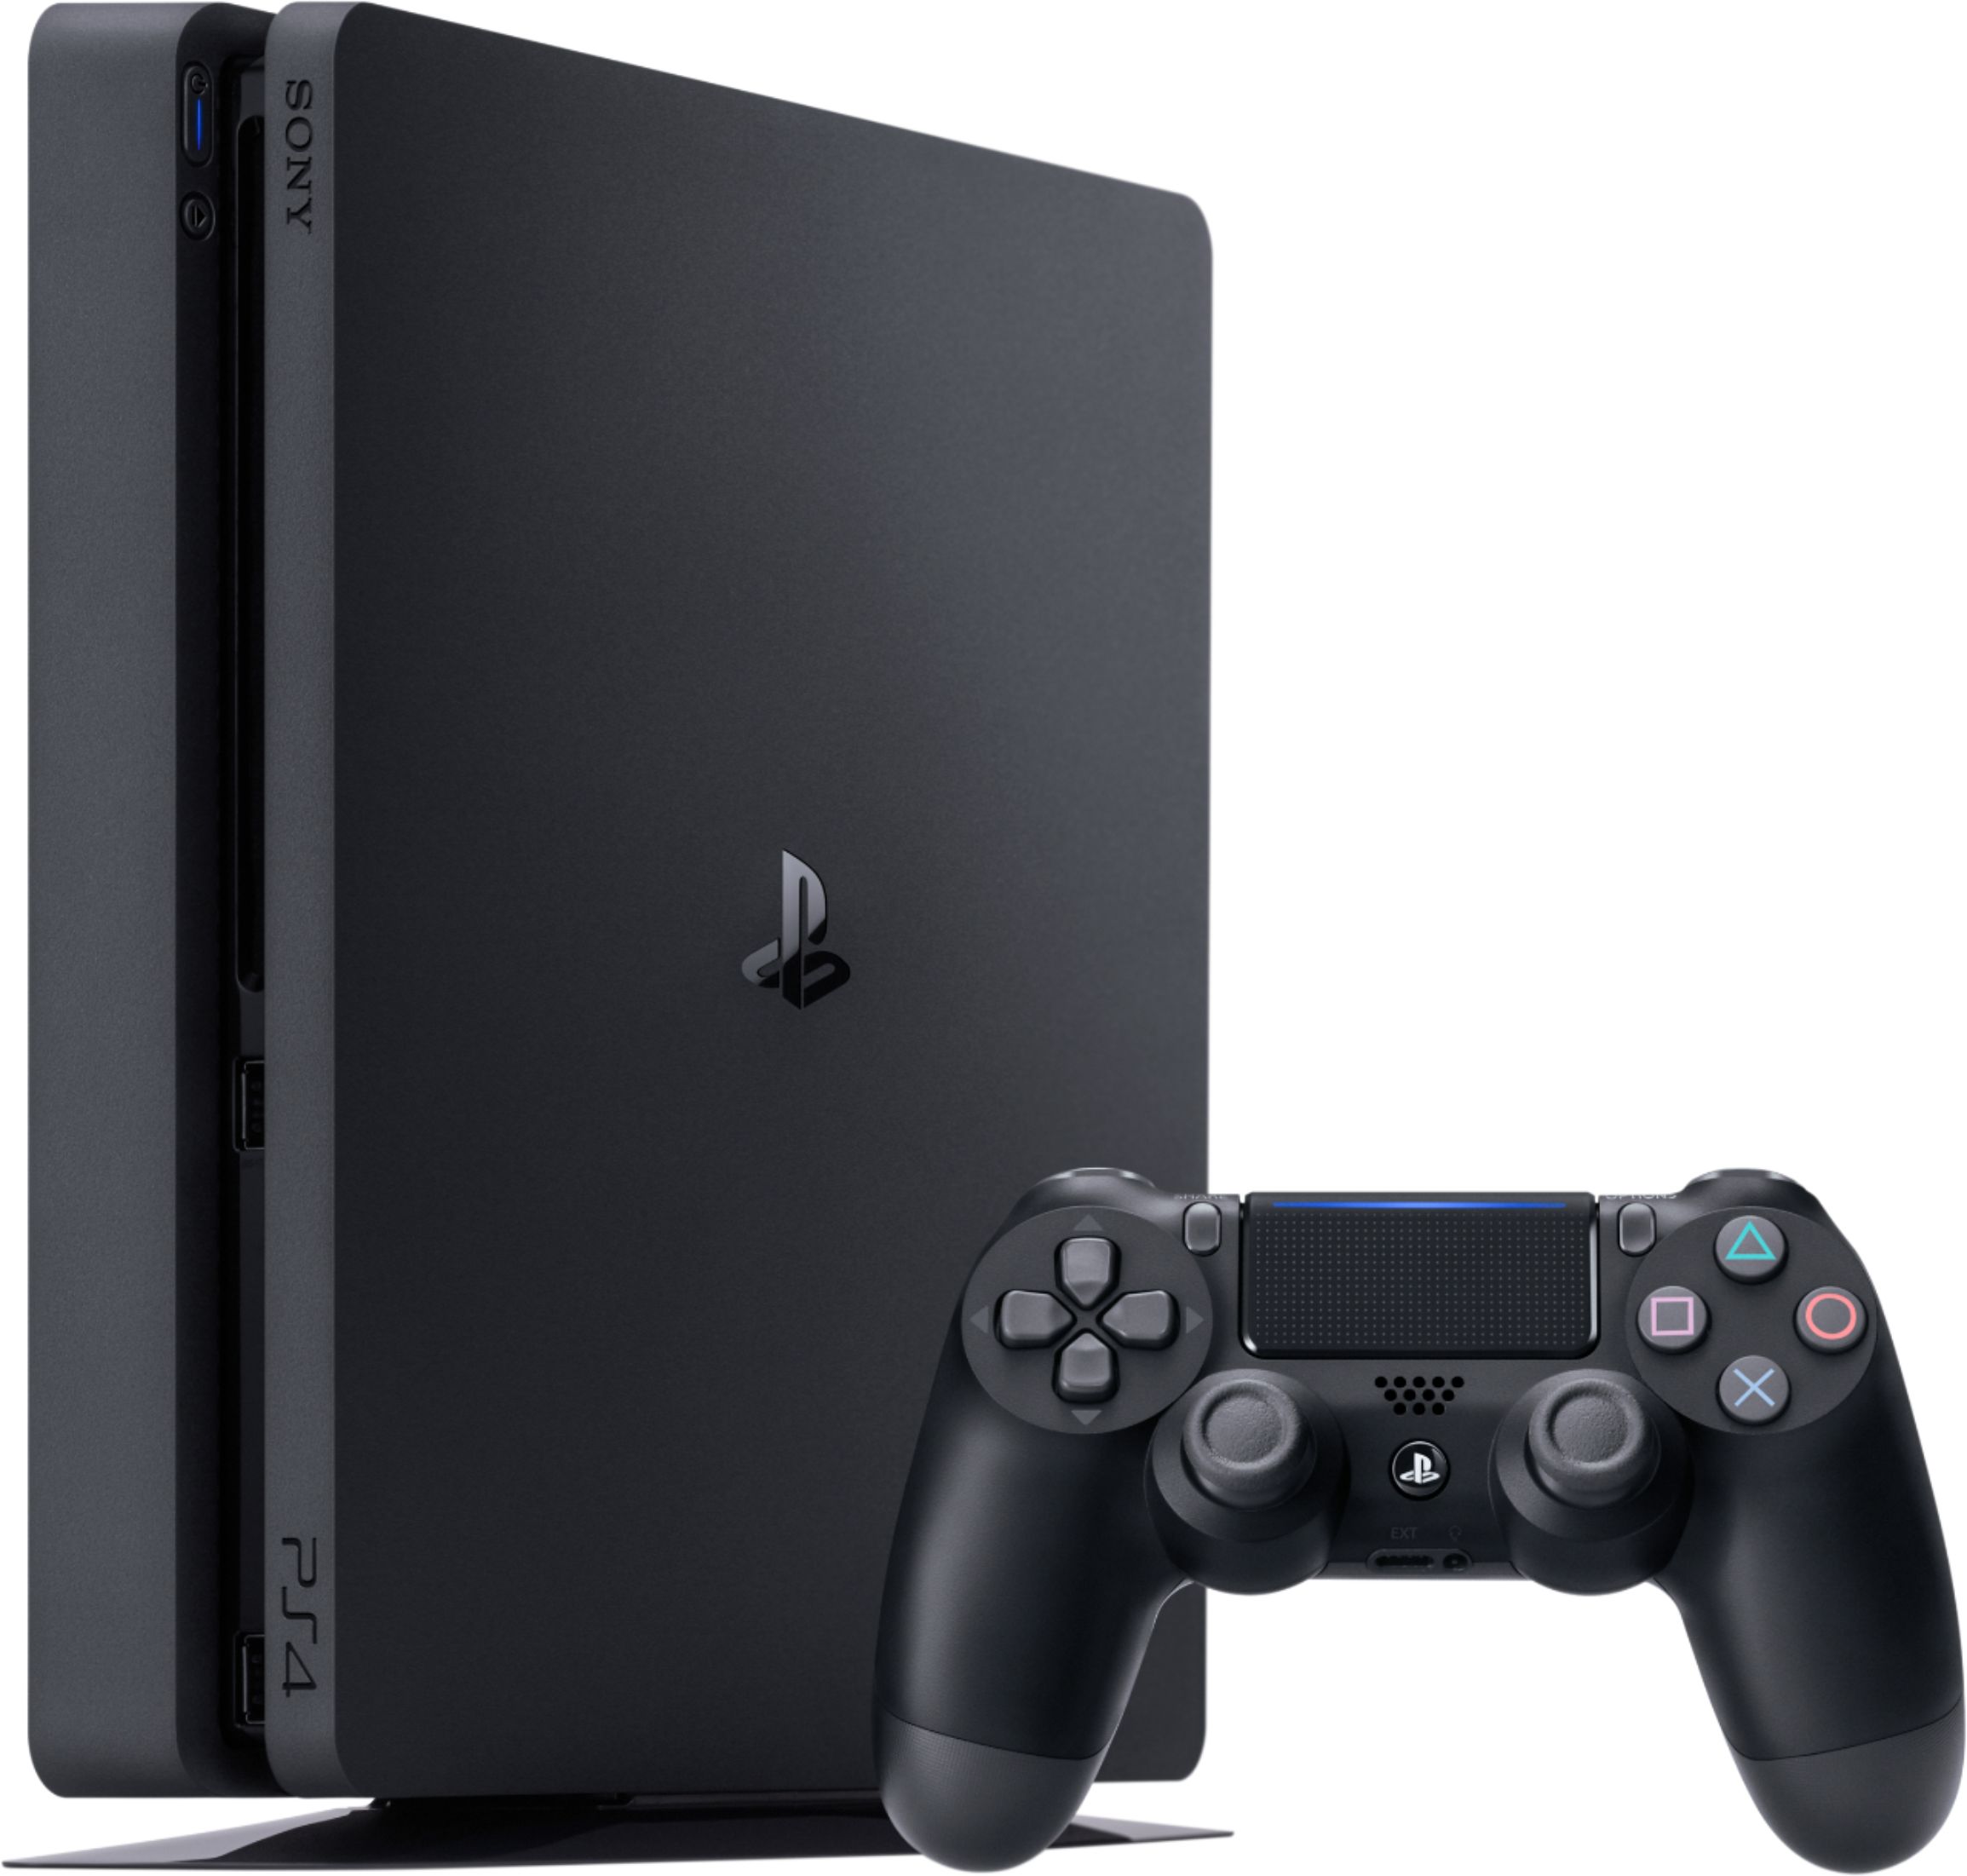 Questions and Answers: Sony PlayStation 4 1TB Console Black 3002337